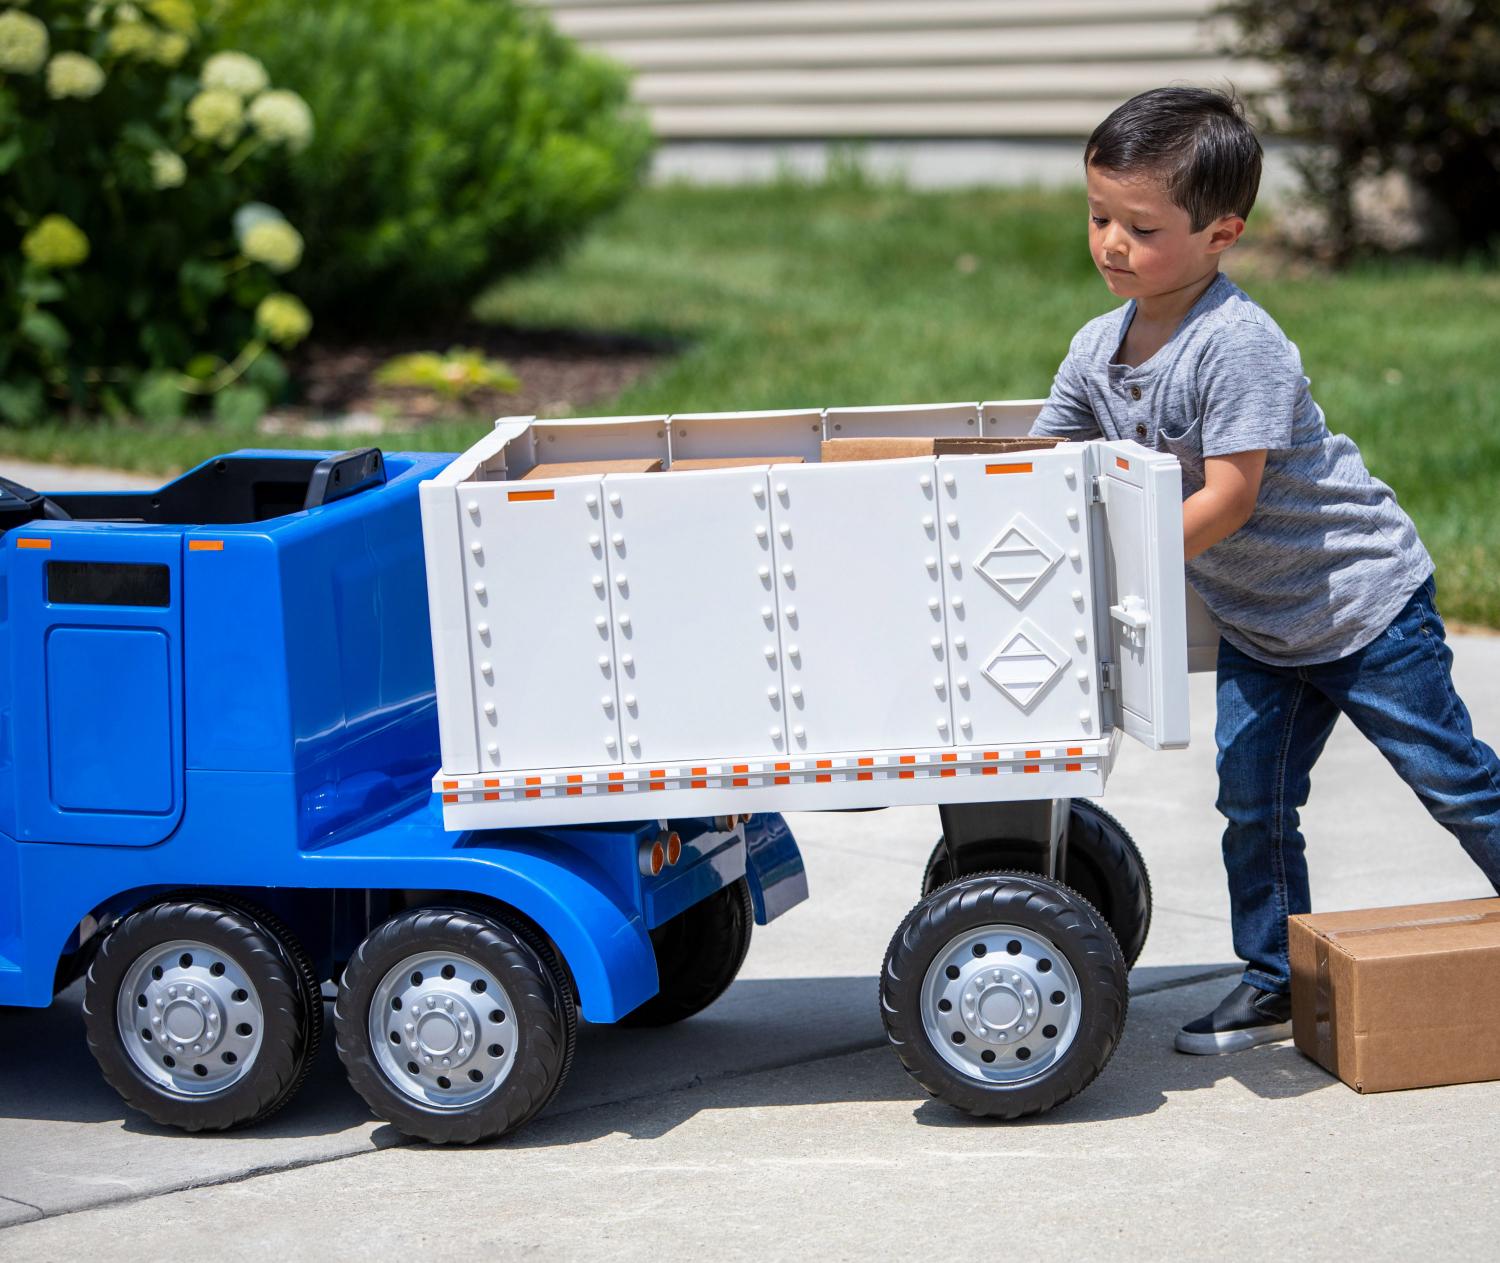 Electric Semi-Truck Ride-On Toy - Kids ride-on Big-Rig electric powered toy car